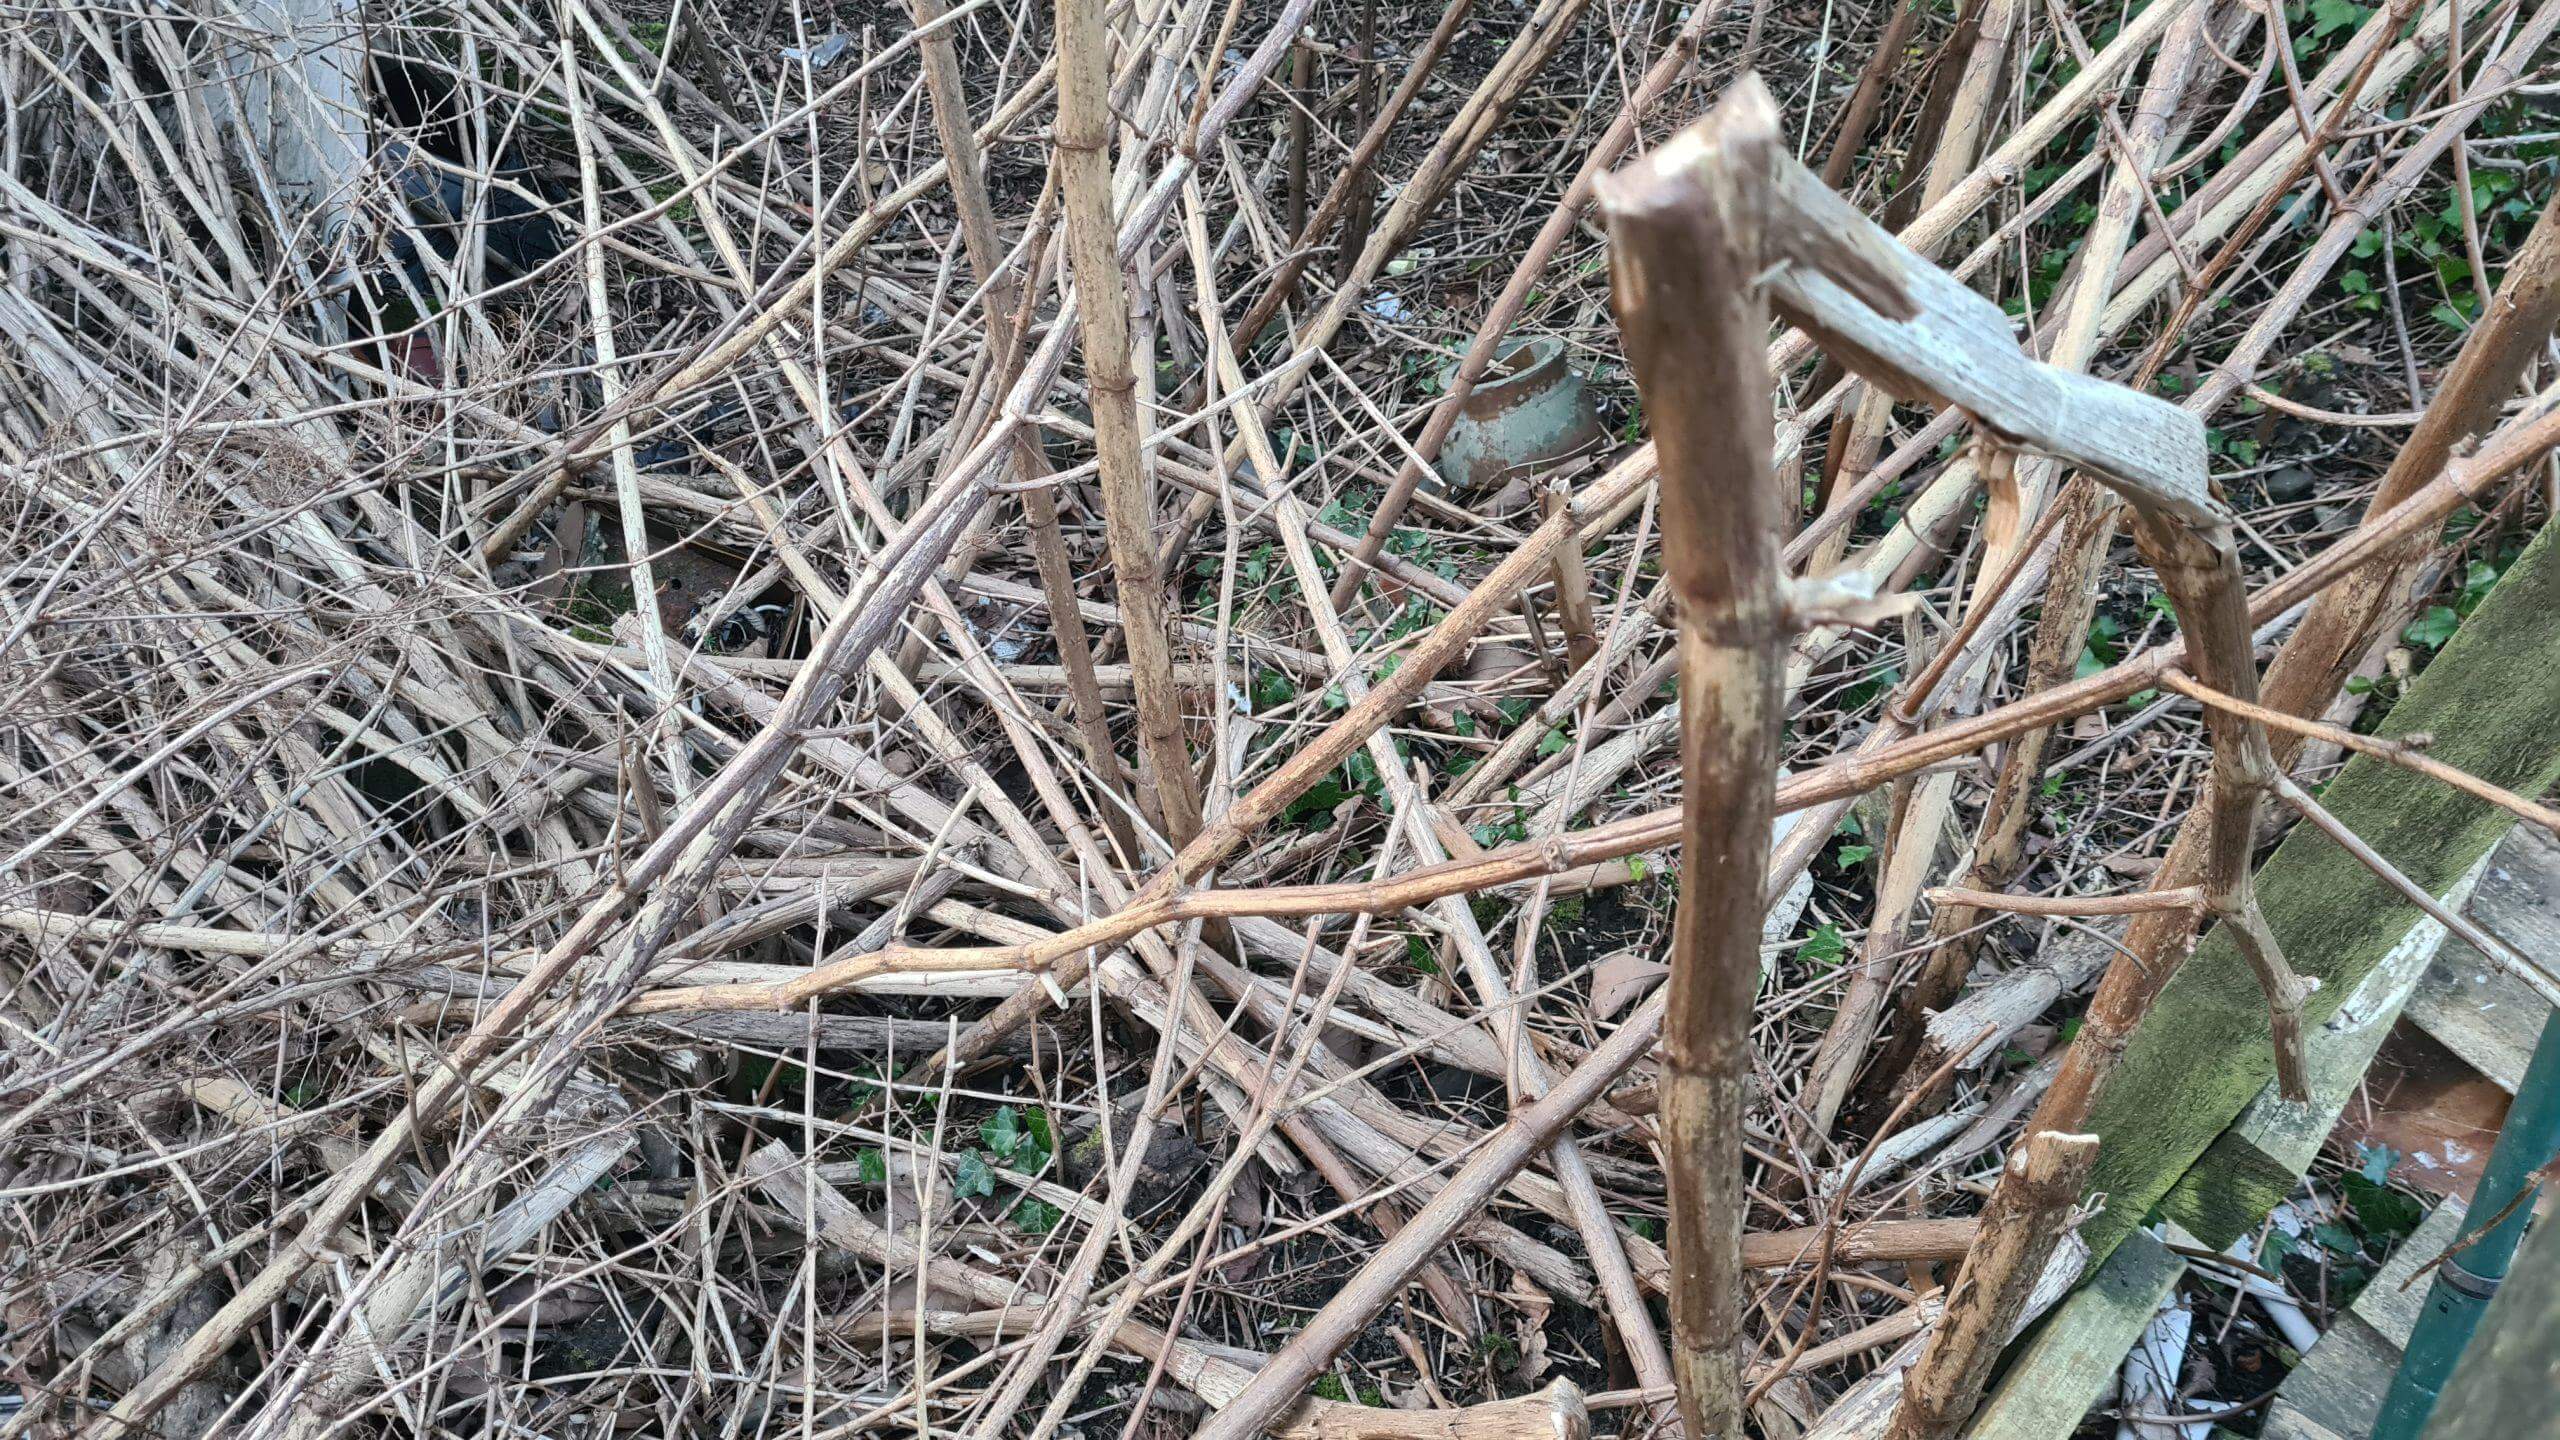 Clearing Japanese knotweed off your property can reclaim your garden back